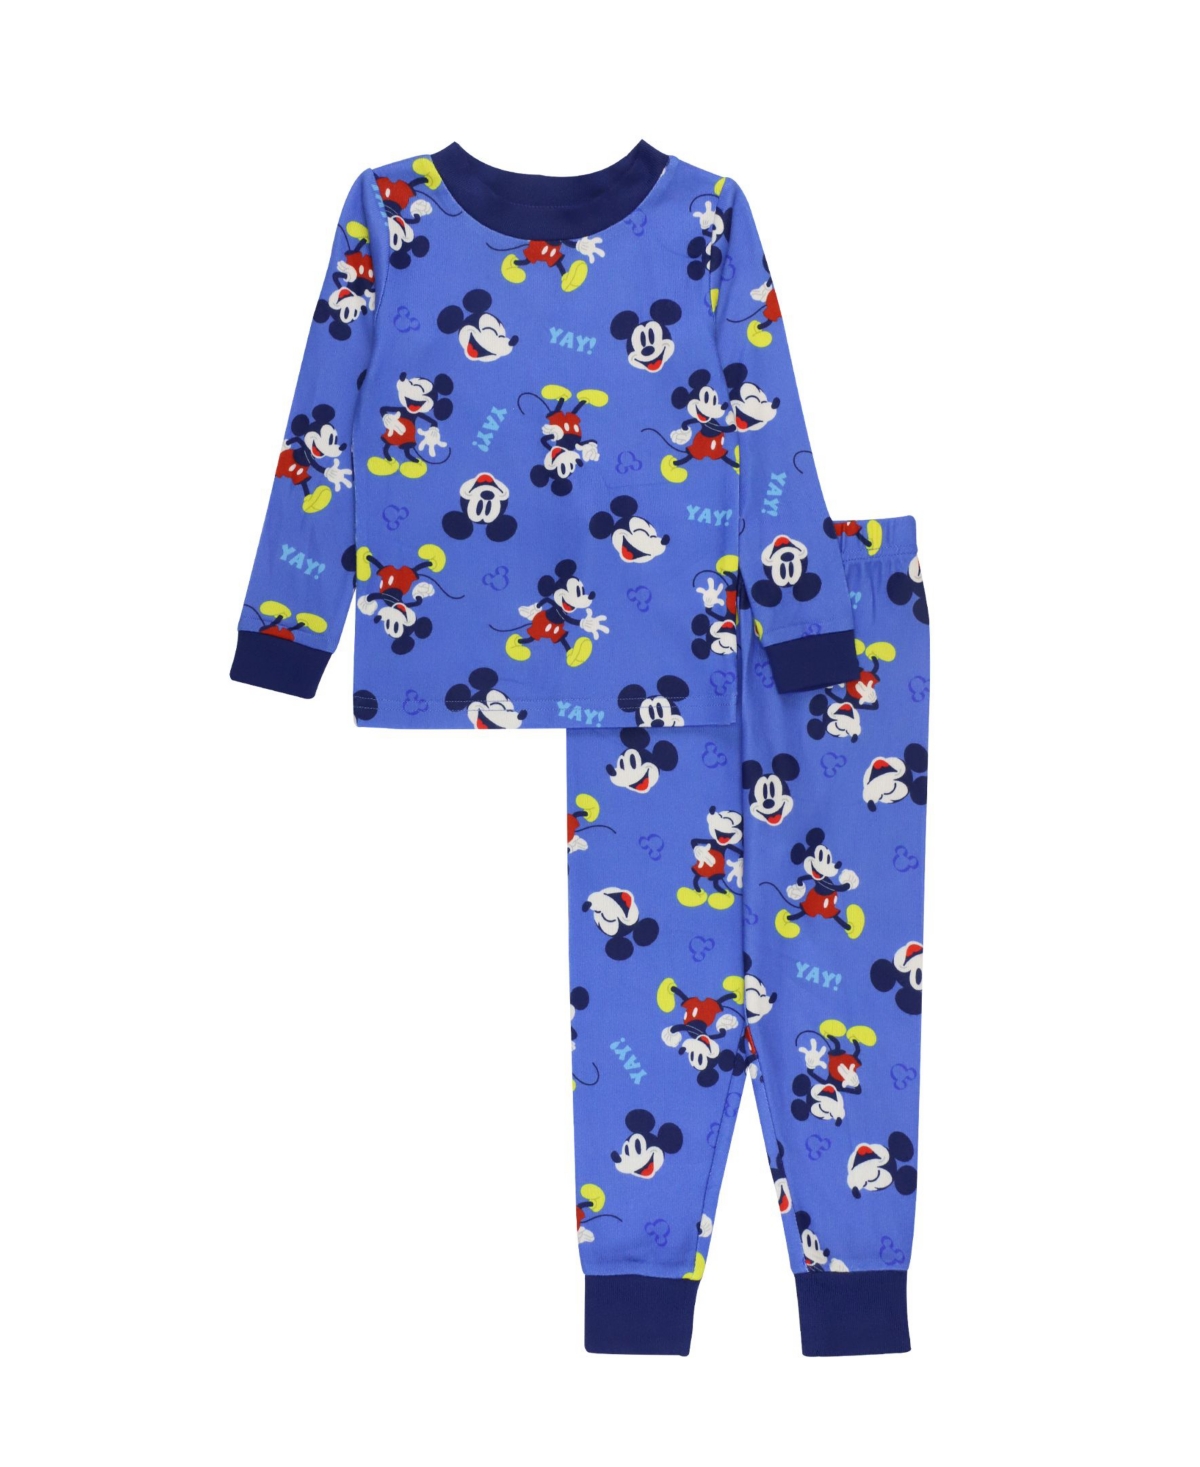 Ame Toddler Boys Mickey Mouse Pajamas, 2 Piece Set In Assorted